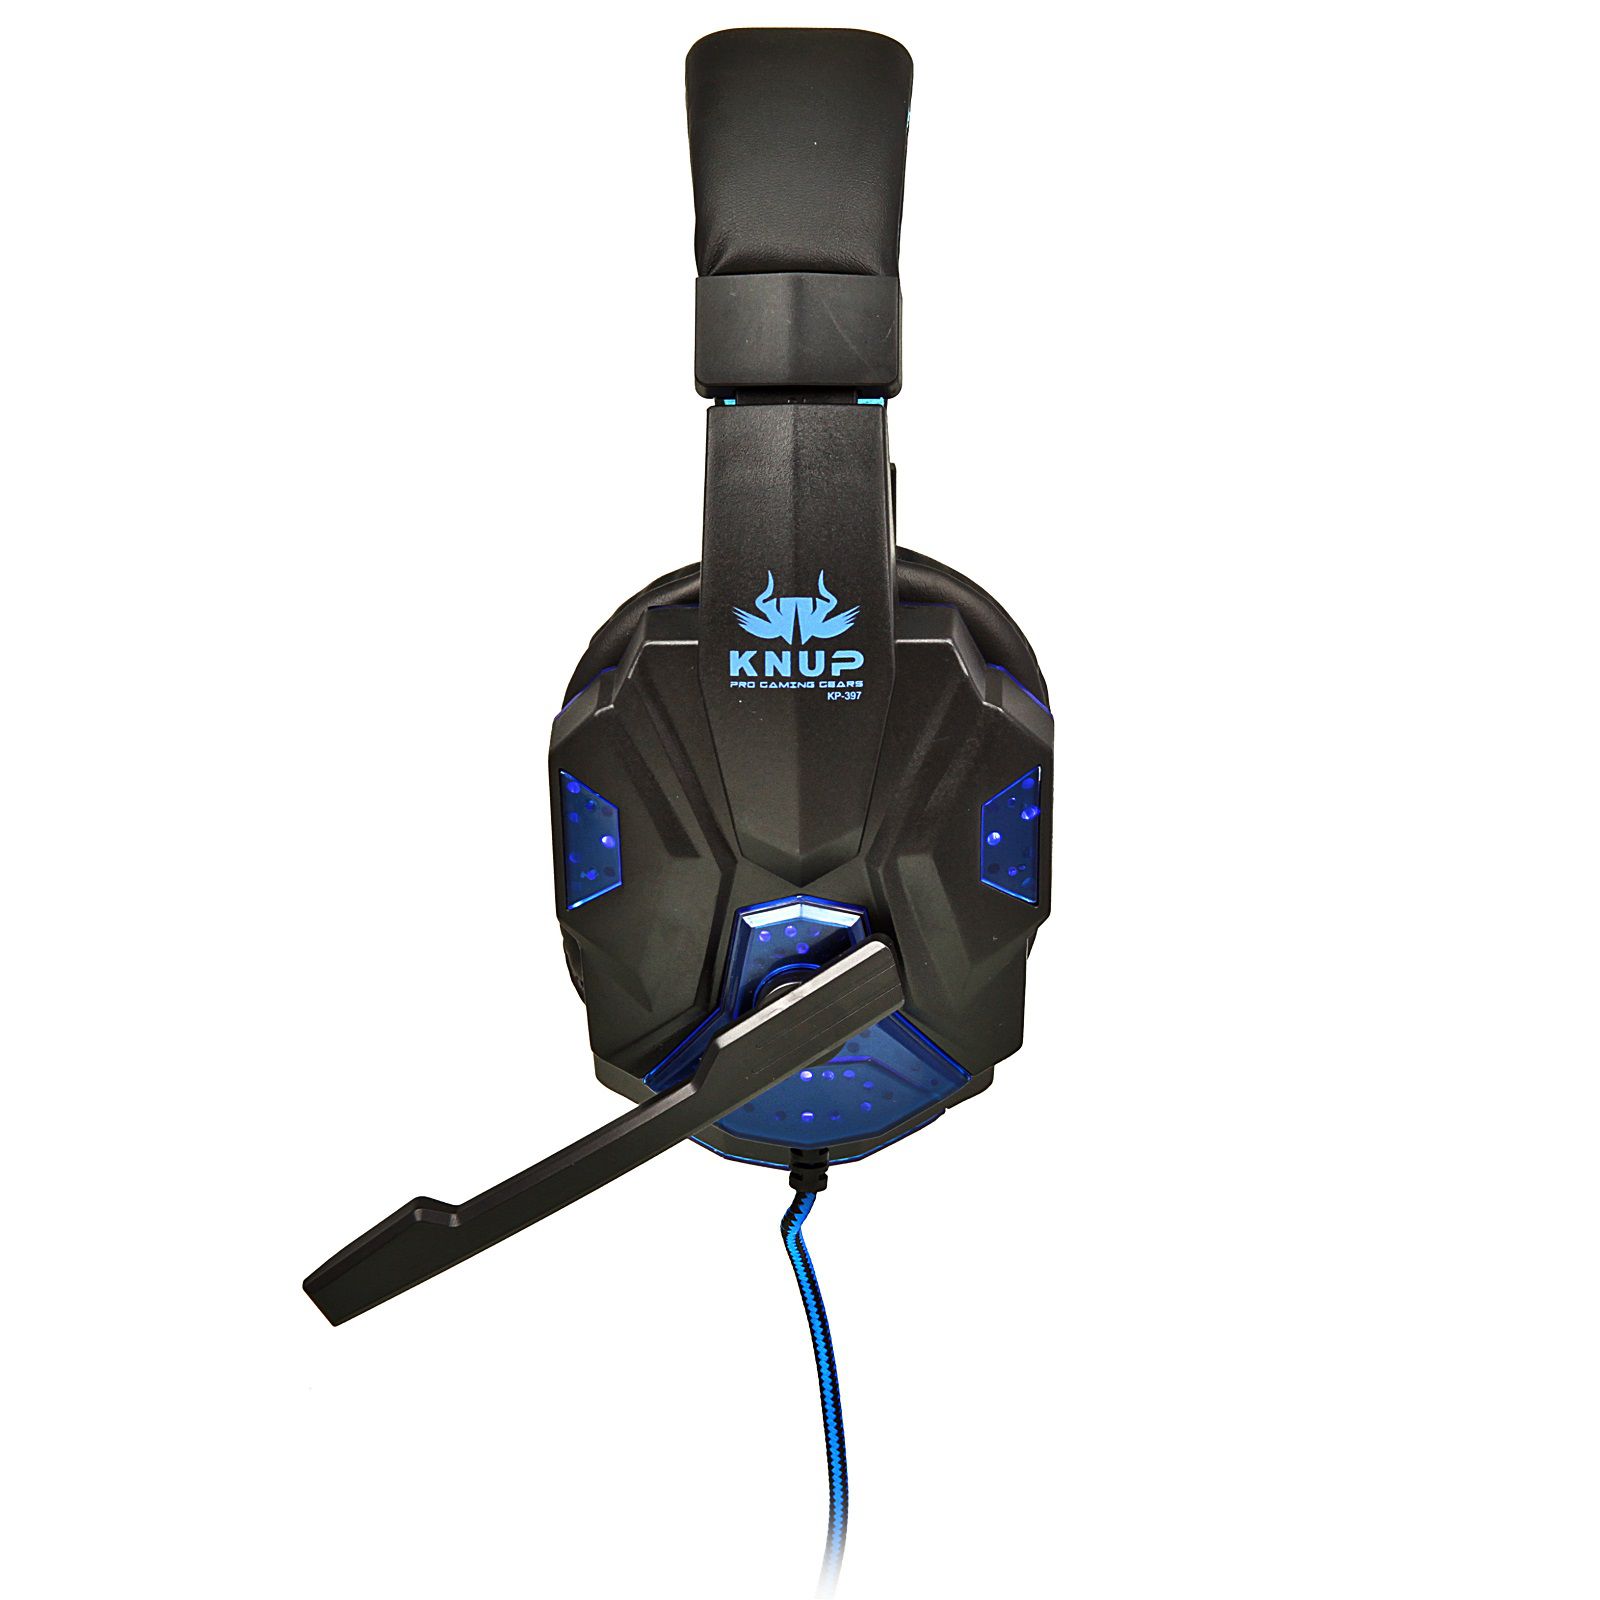 Fone Ouvido Headset Gamer PC P2 C/ LED Knup KP-397